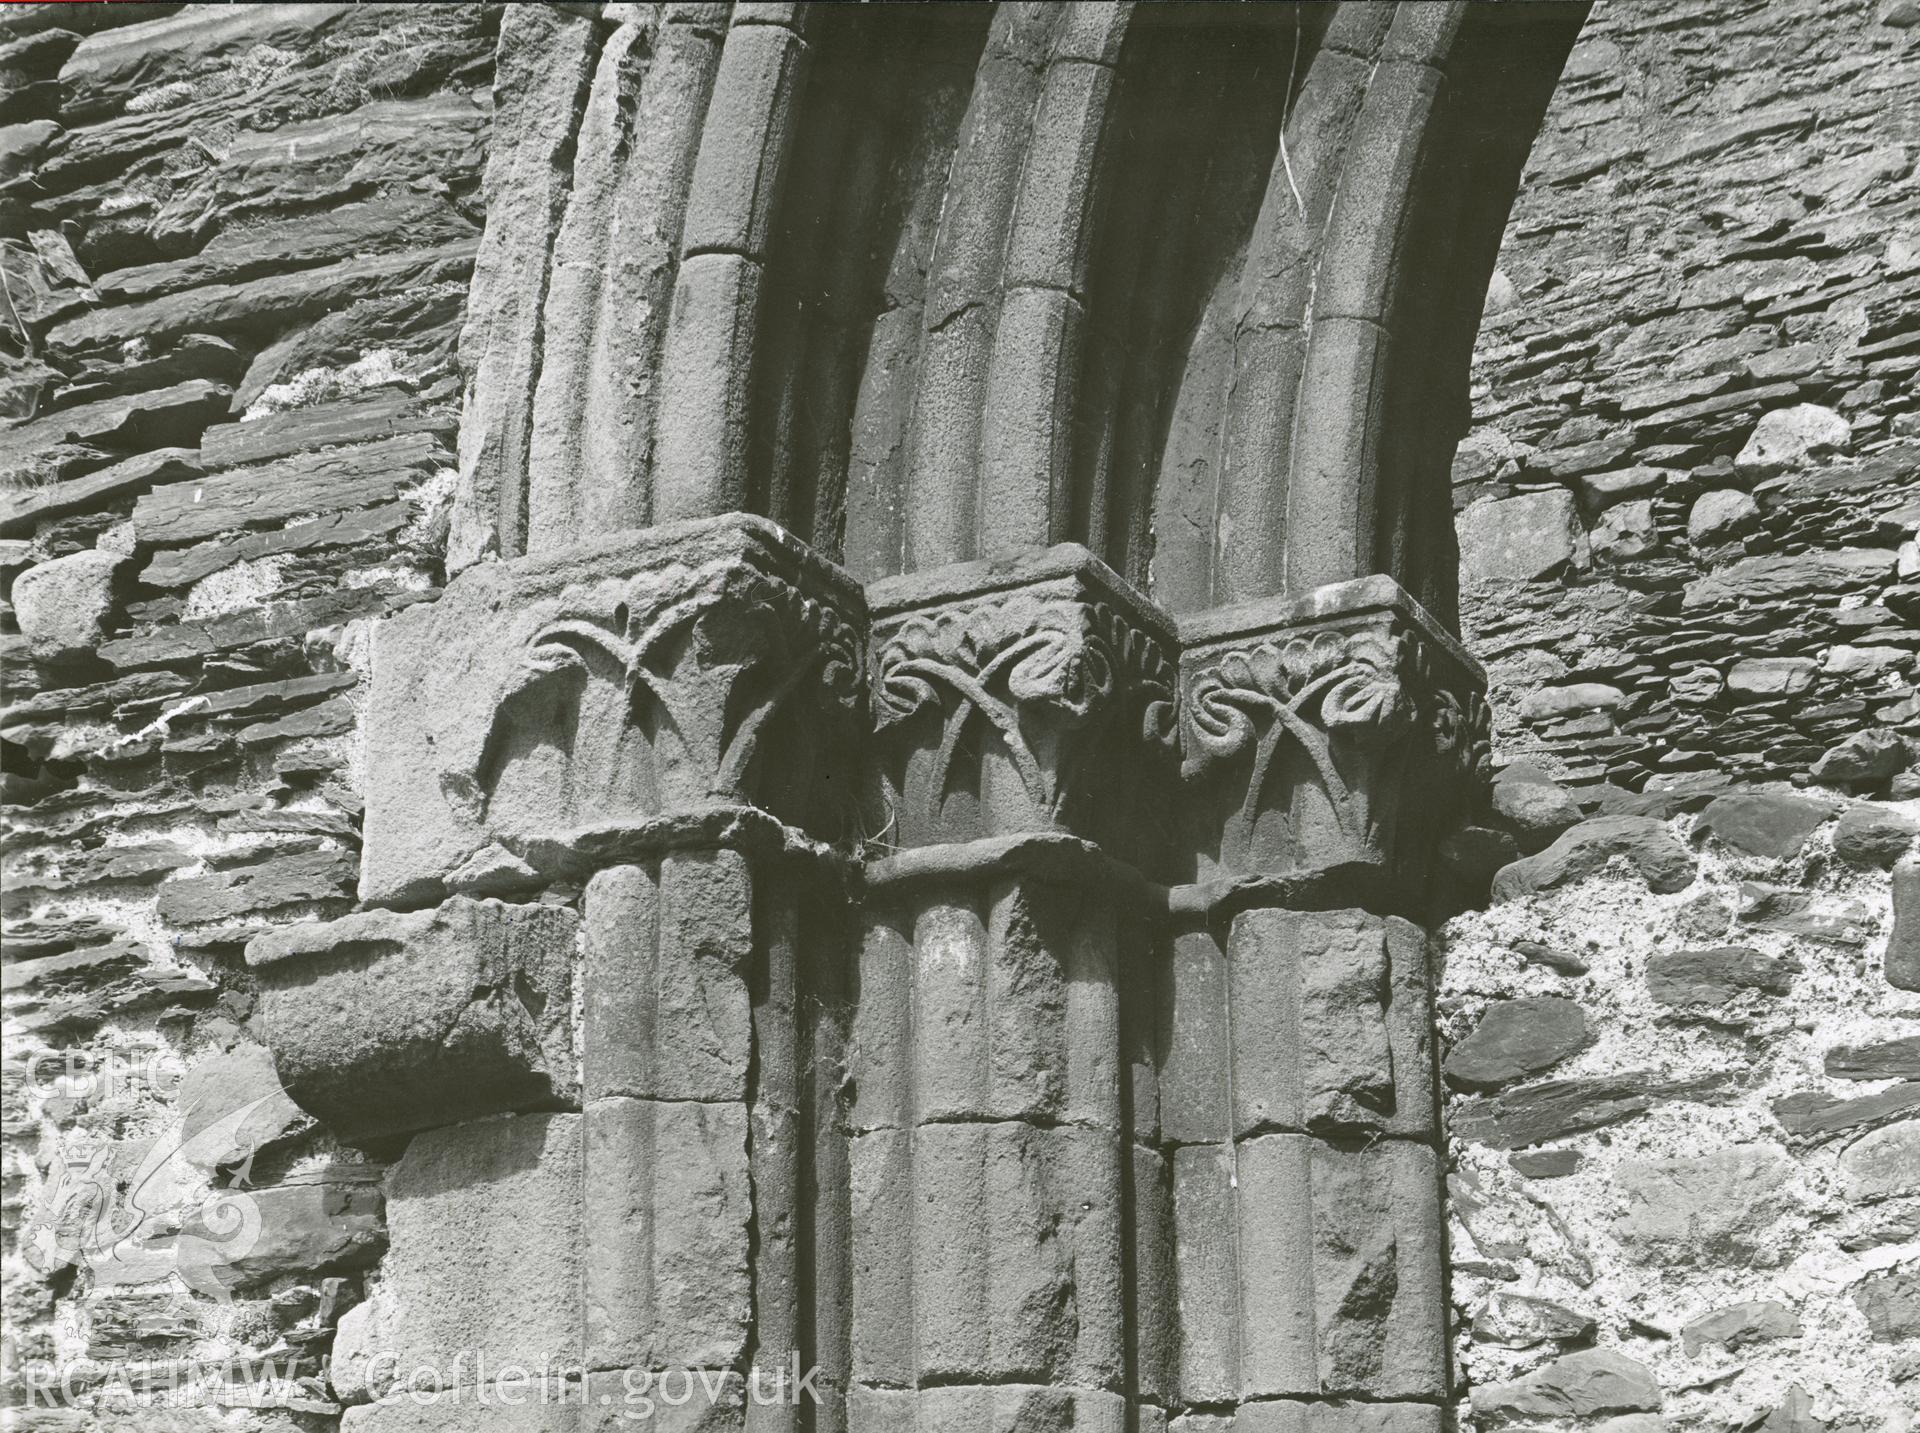 Digitised copy of a black and white photograph showing door to south aisle on north side of cloister at Valle Crucis Abbey, taken by F.H. Crossley, 1949. Copied from print as negative held by NMR England (Historic England)